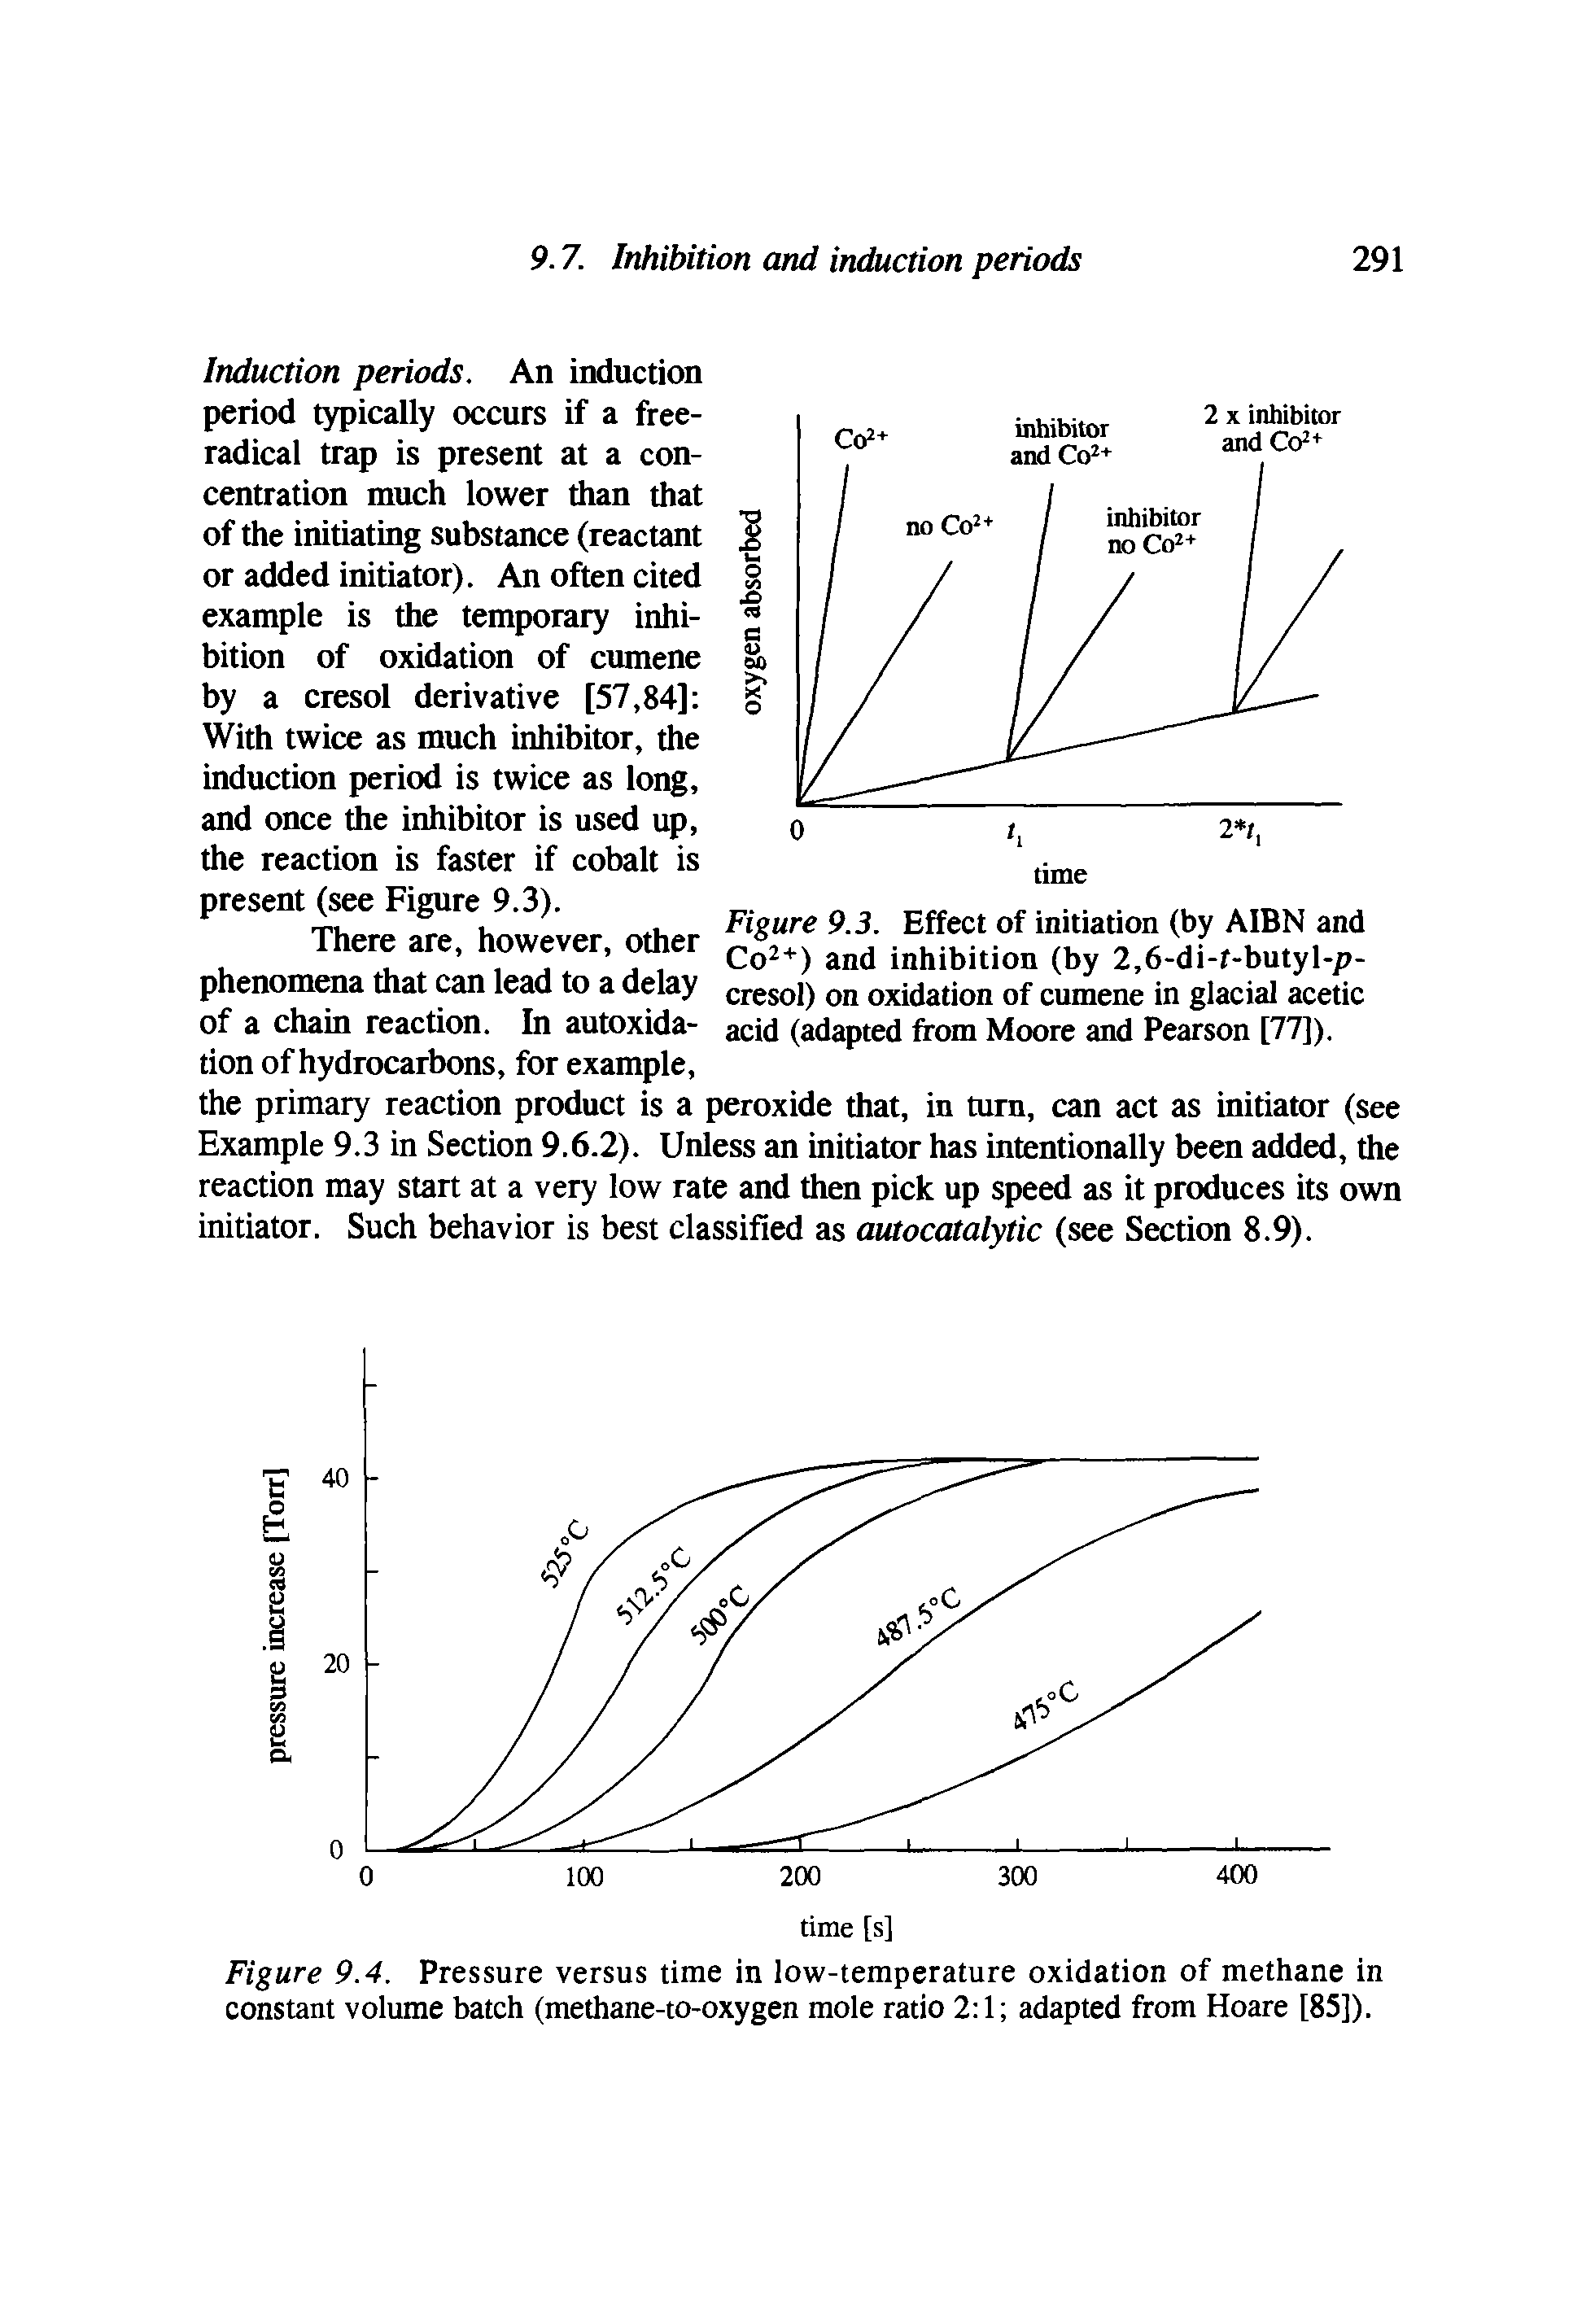 Figure 9.3. Effect of initiation (by AIBN and Co2+) and inhibition (by 2,6-di-f-butyl-p-cresol) on oxidation of cumene in glacial acetic acid (adapted from Moore and Pearson [77]).